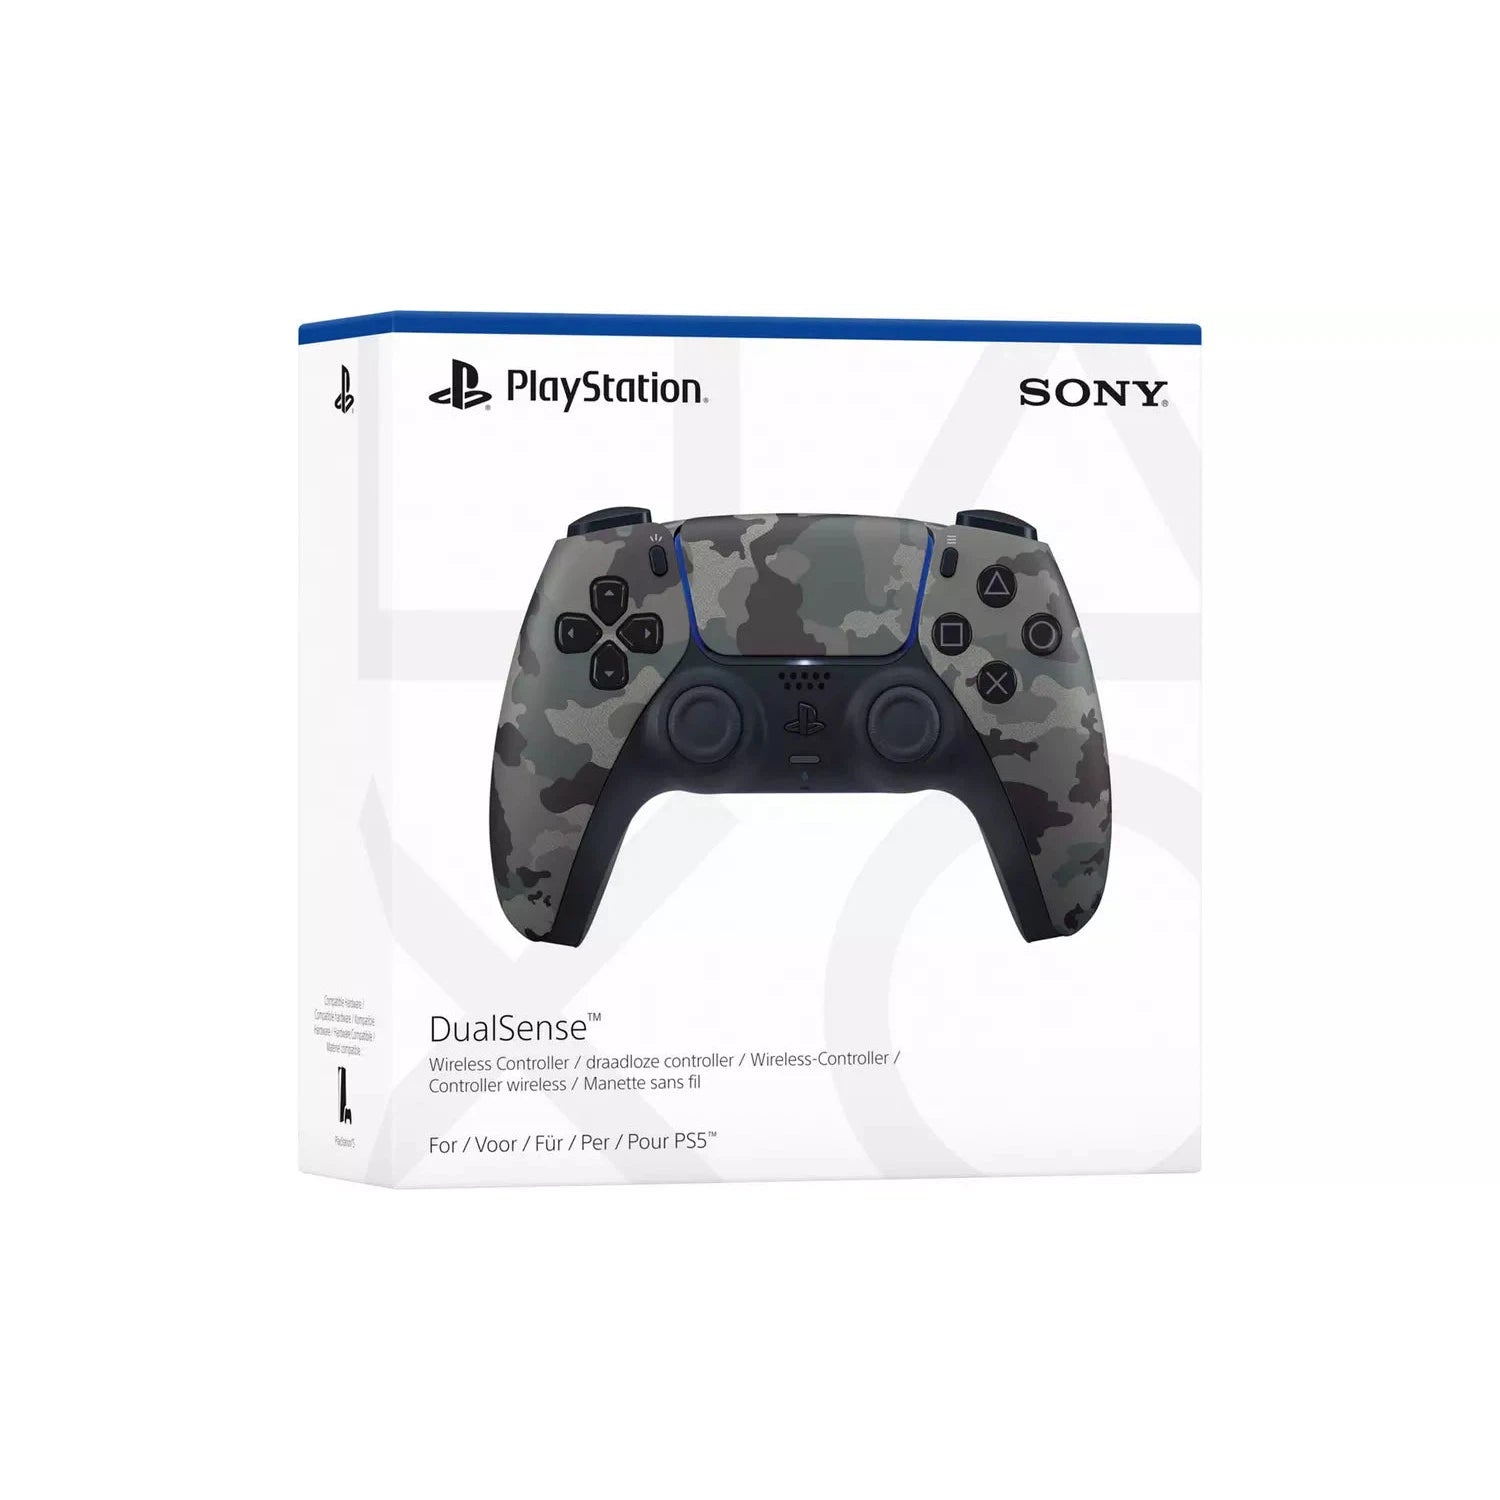 Sony PS5 DualSense Controller - Grey Camouflage - Refurbished Good